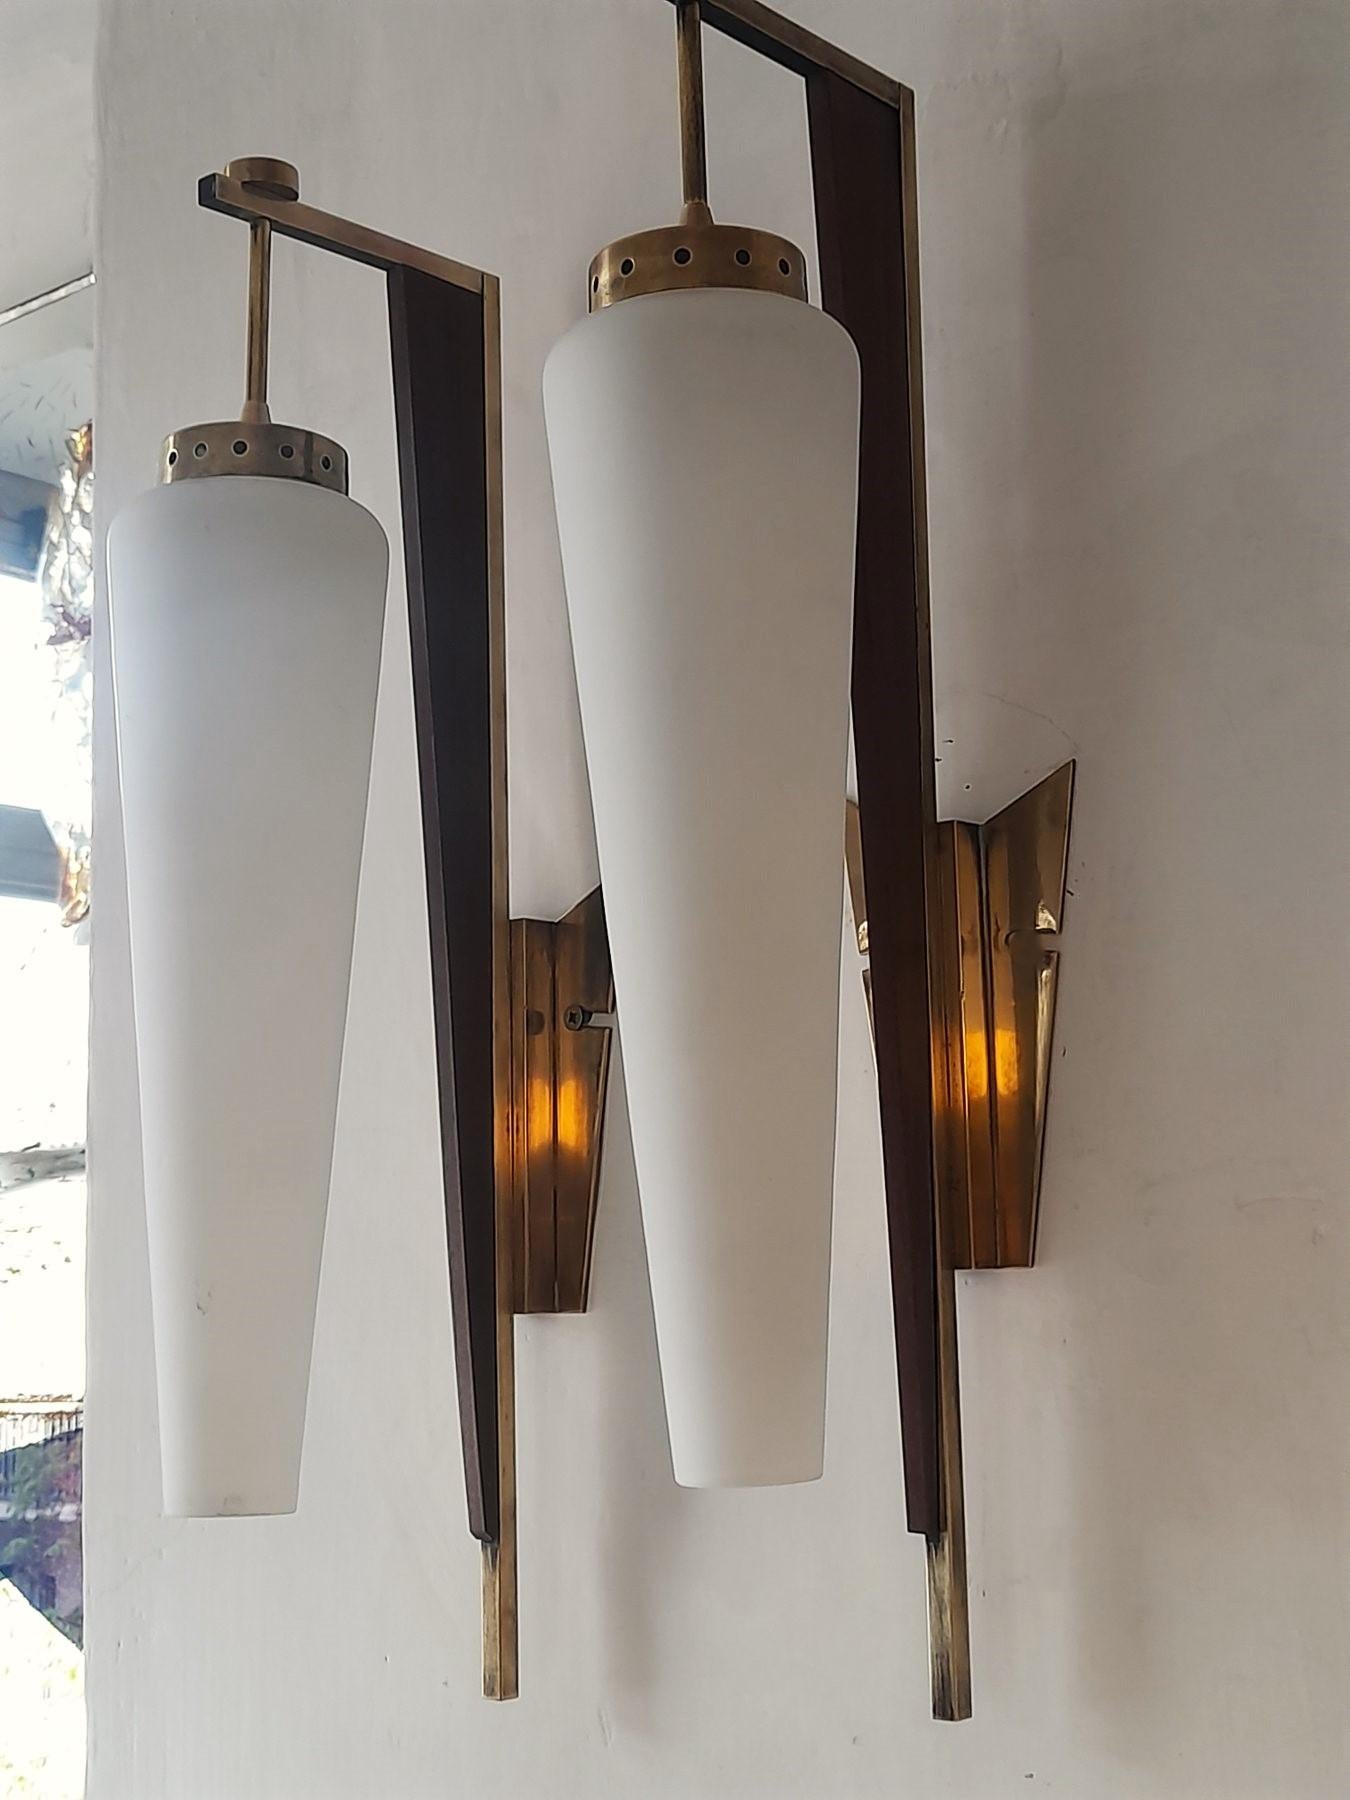 Three Stilnovo Sconces Wall Lights Brass Satin Glass Wood Accents, Italy, 1950s For Sale 2